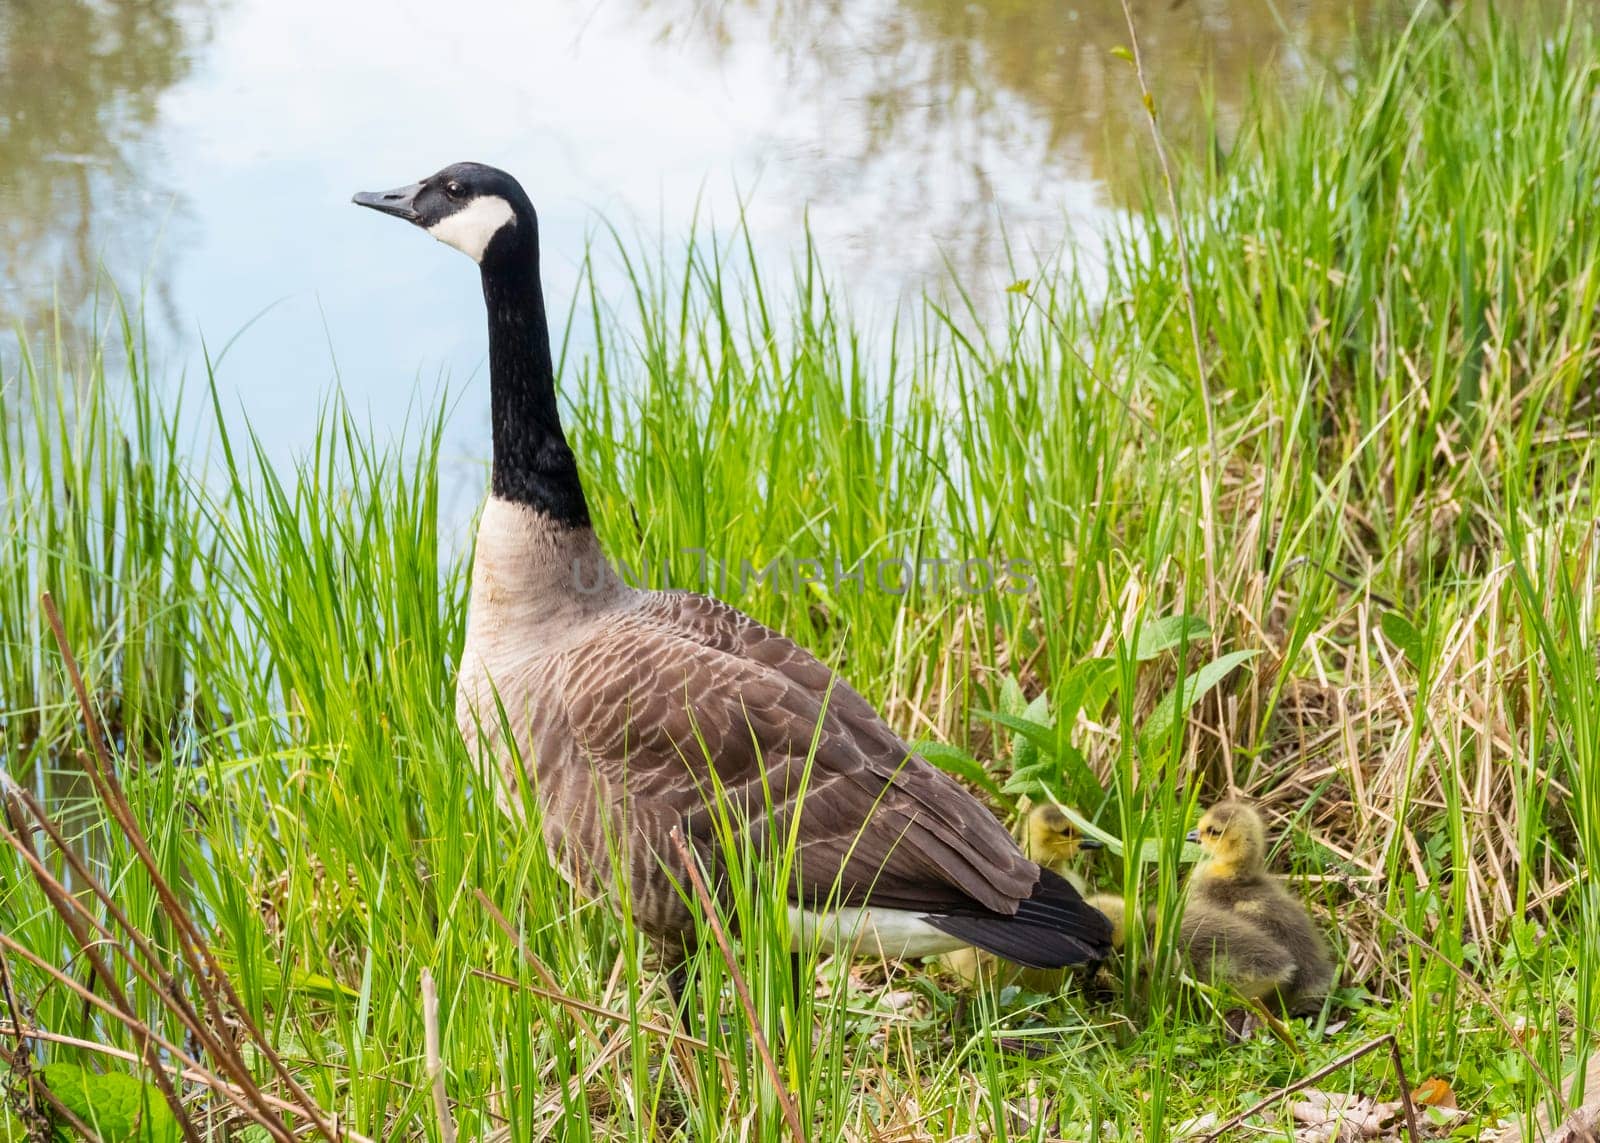 the Branta canadensis or big canadian goose by compuinfoto